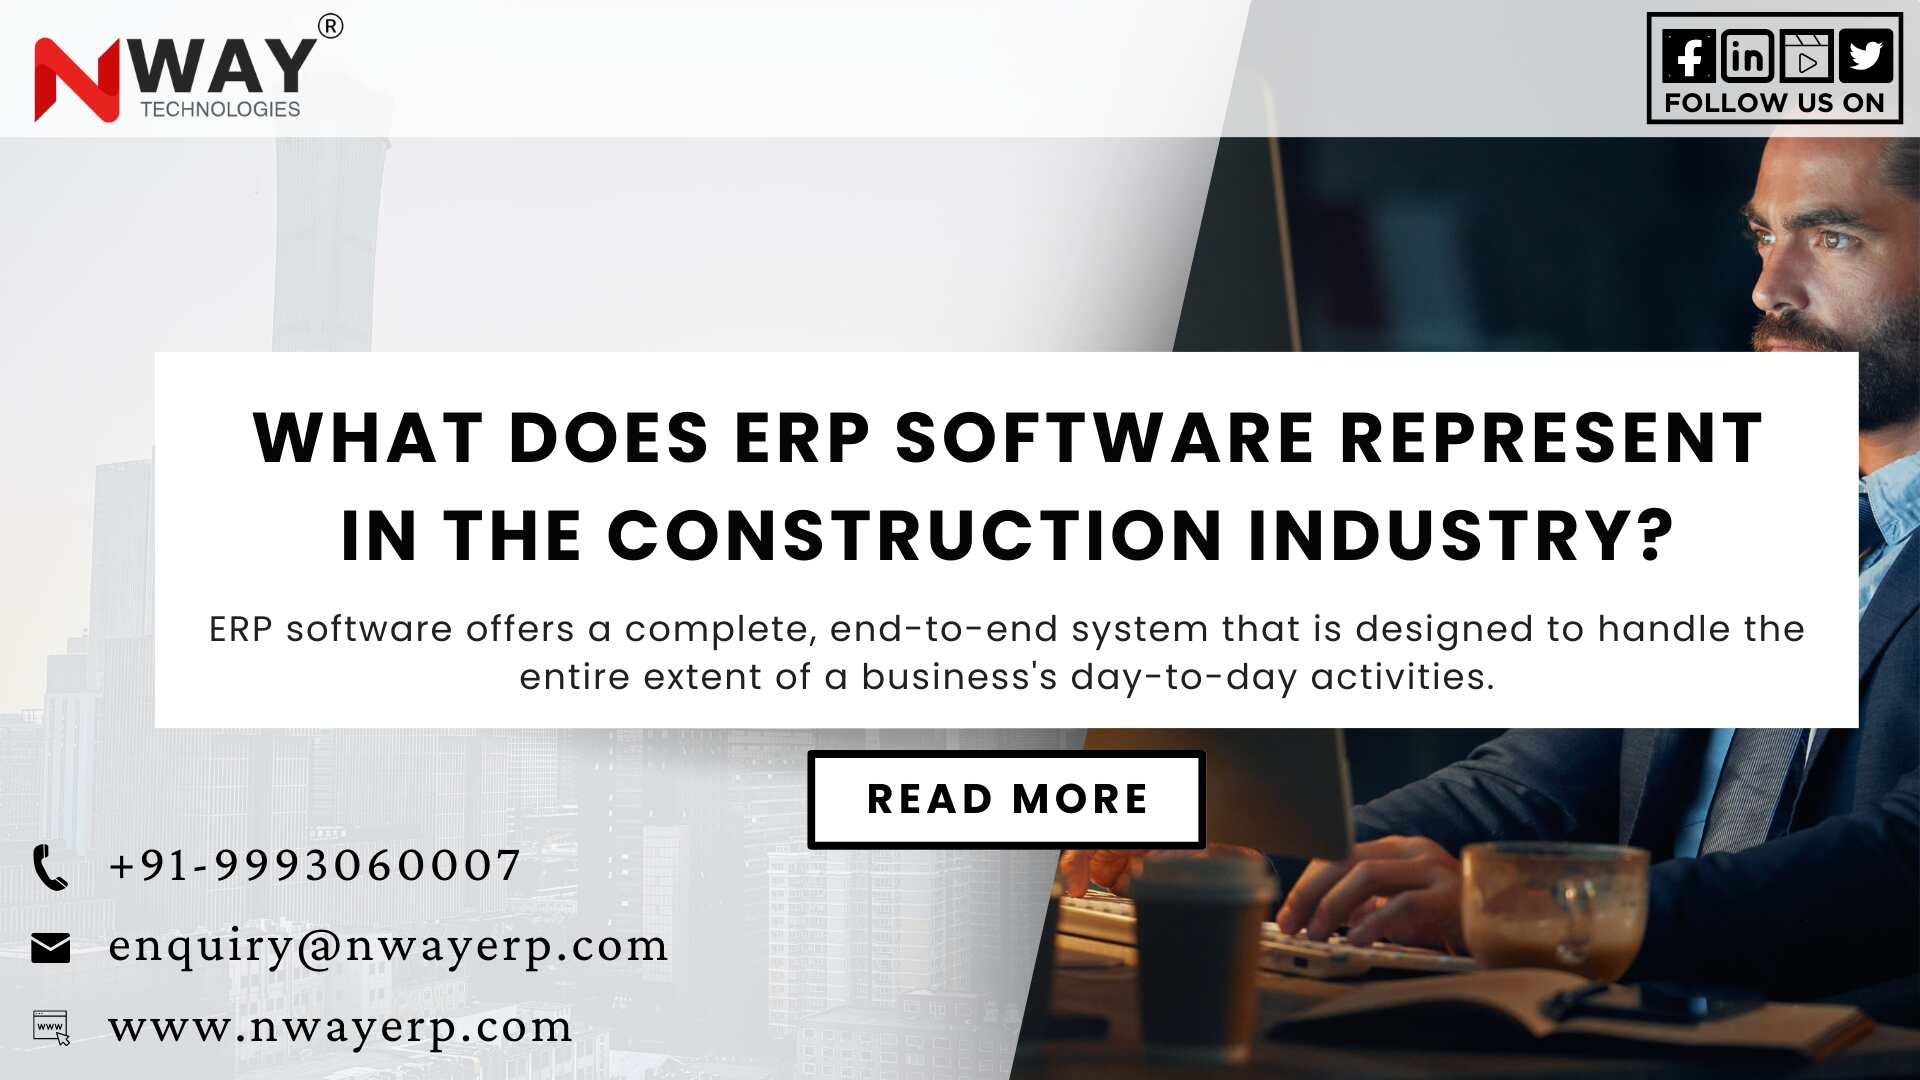 What Does ERP Software Represent in The Construction Industry?